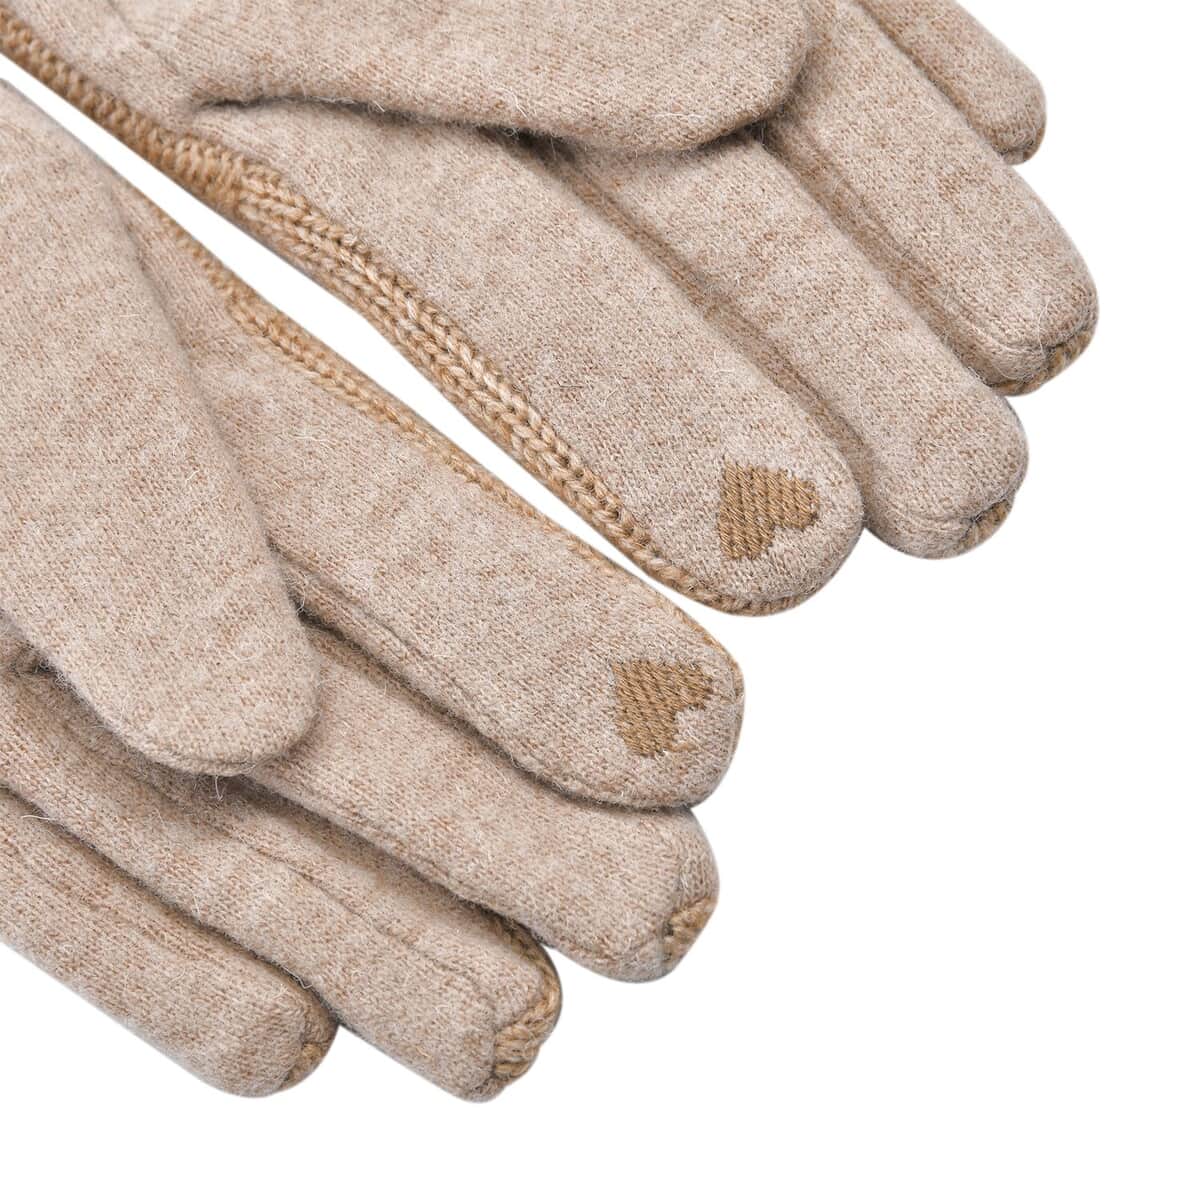 Beige Cashmere Warm Gloves with Faux Fur and Equipped Touch Screen Function (9.05"x3.54") image number 3